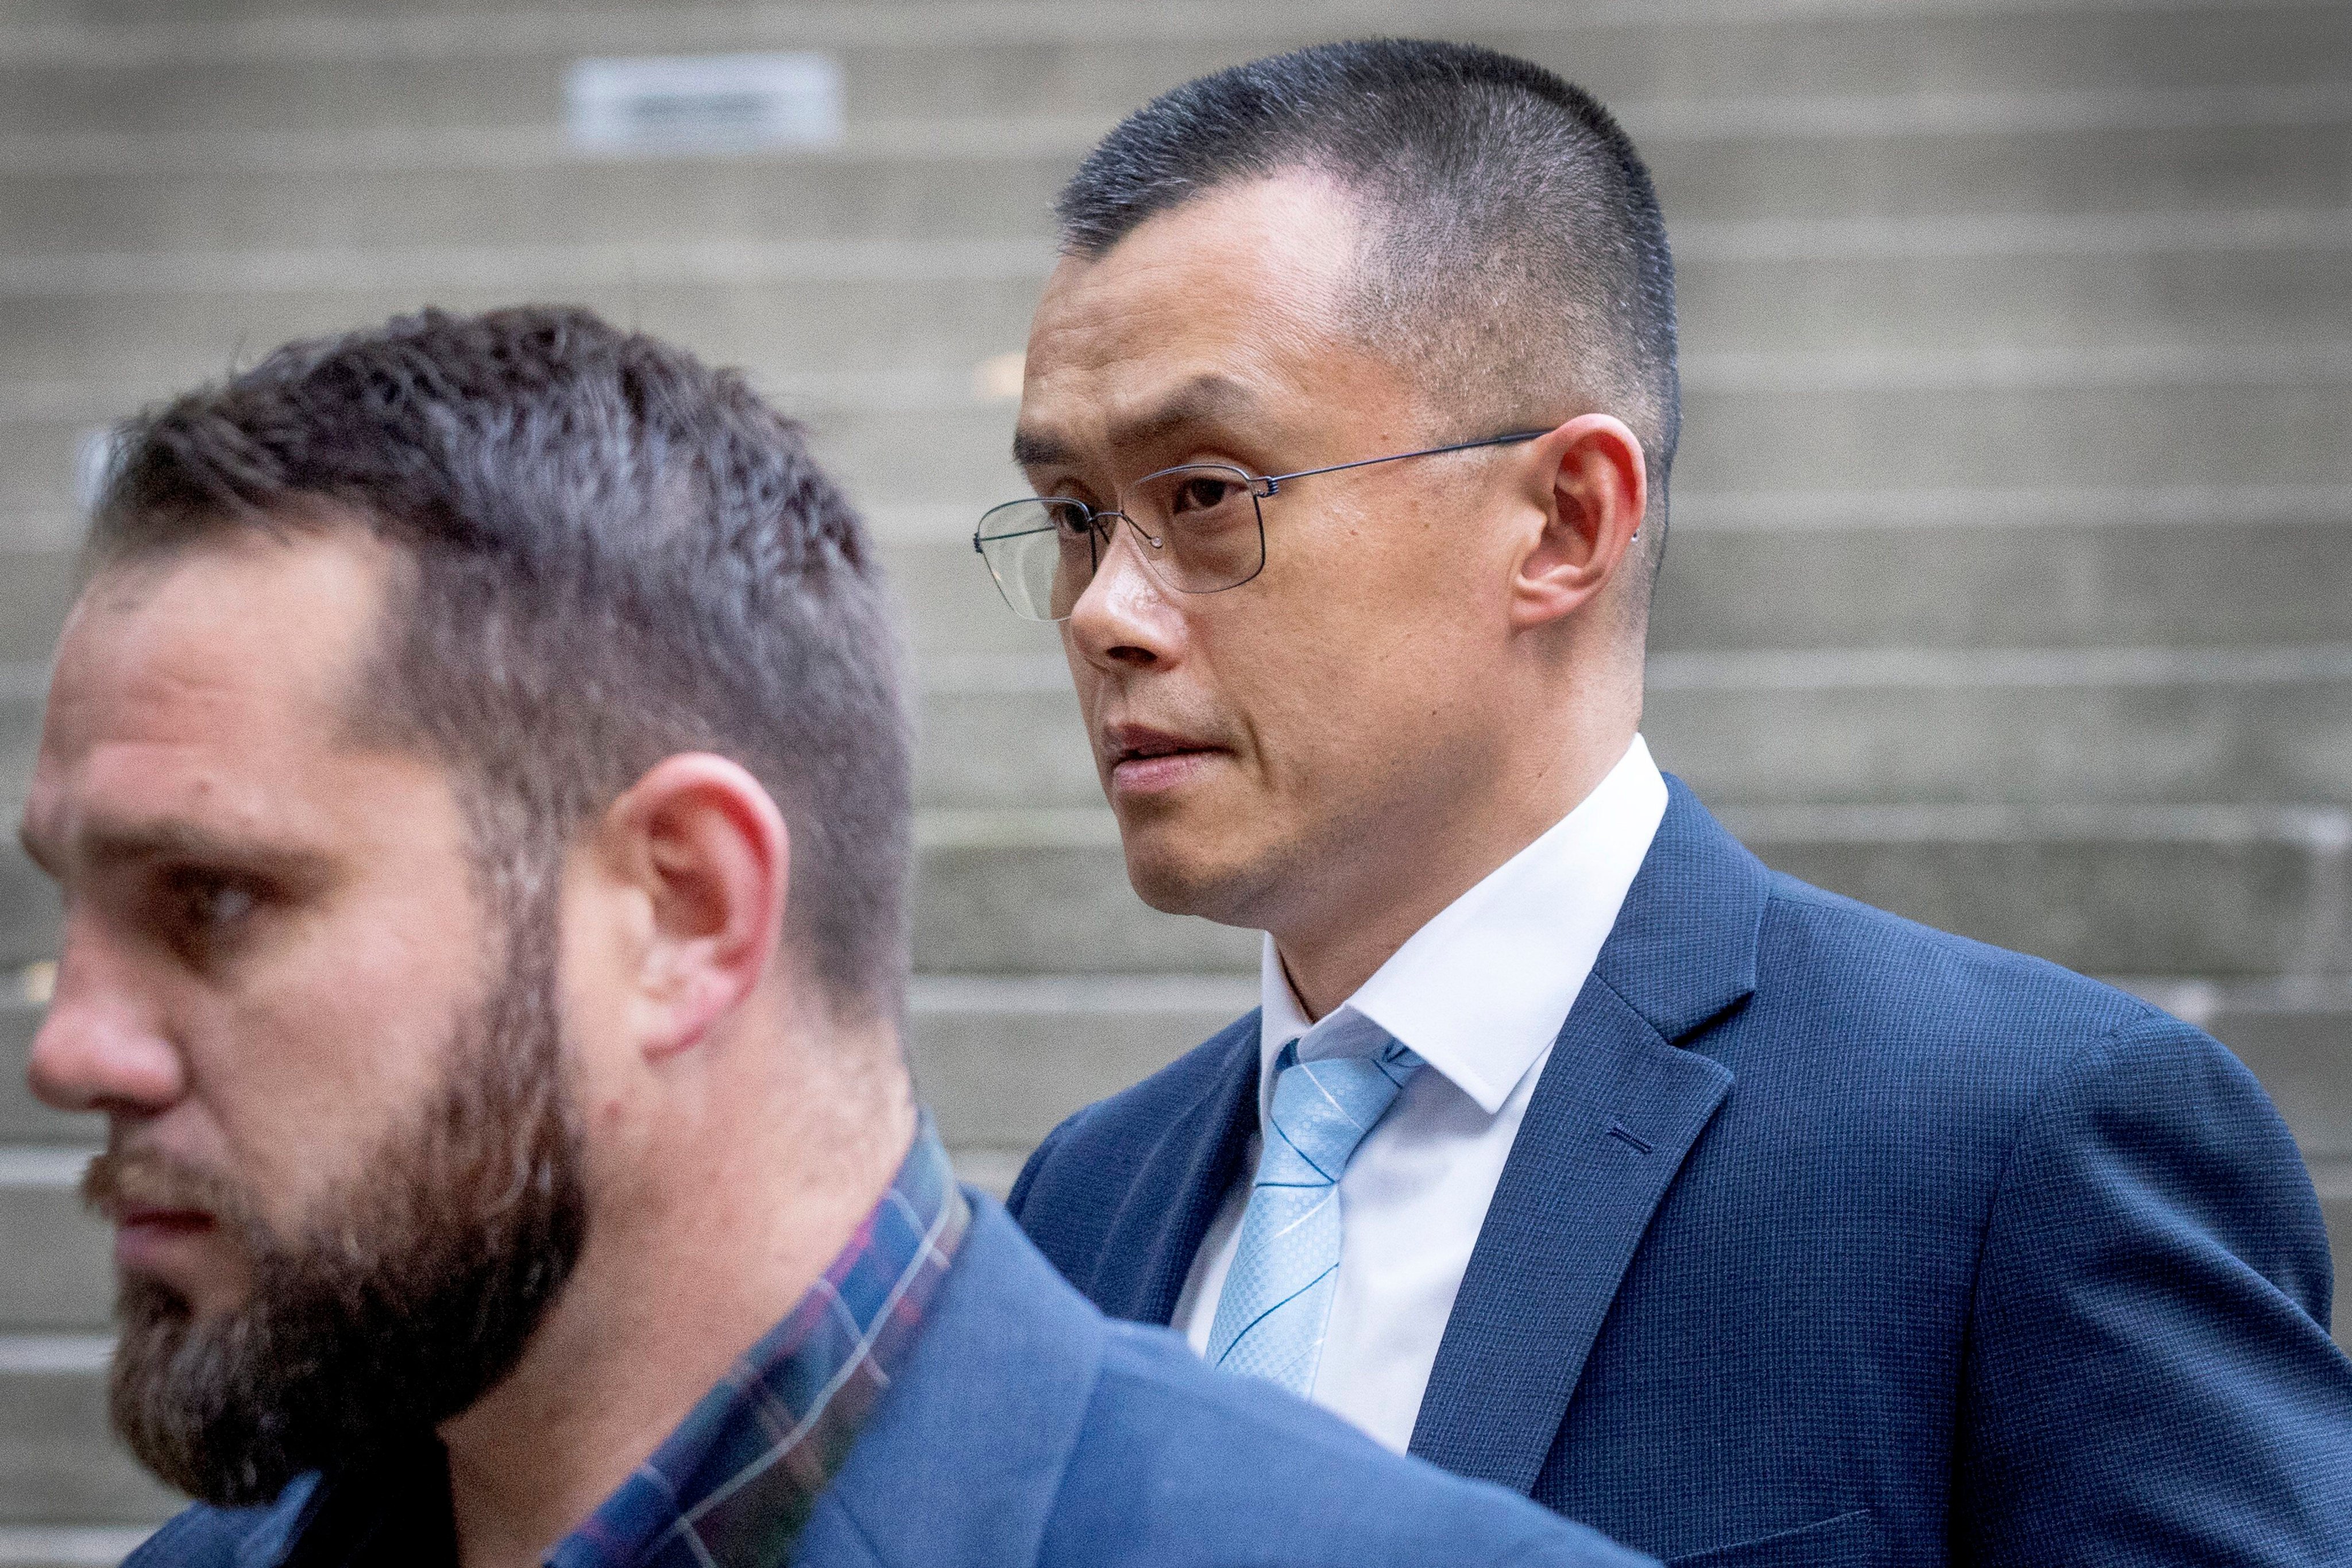 Binance founder and CEO Zhao Changpeng Zhao, right, leaves federal court in Seattle last November. Photo: The Seattle Times via AP